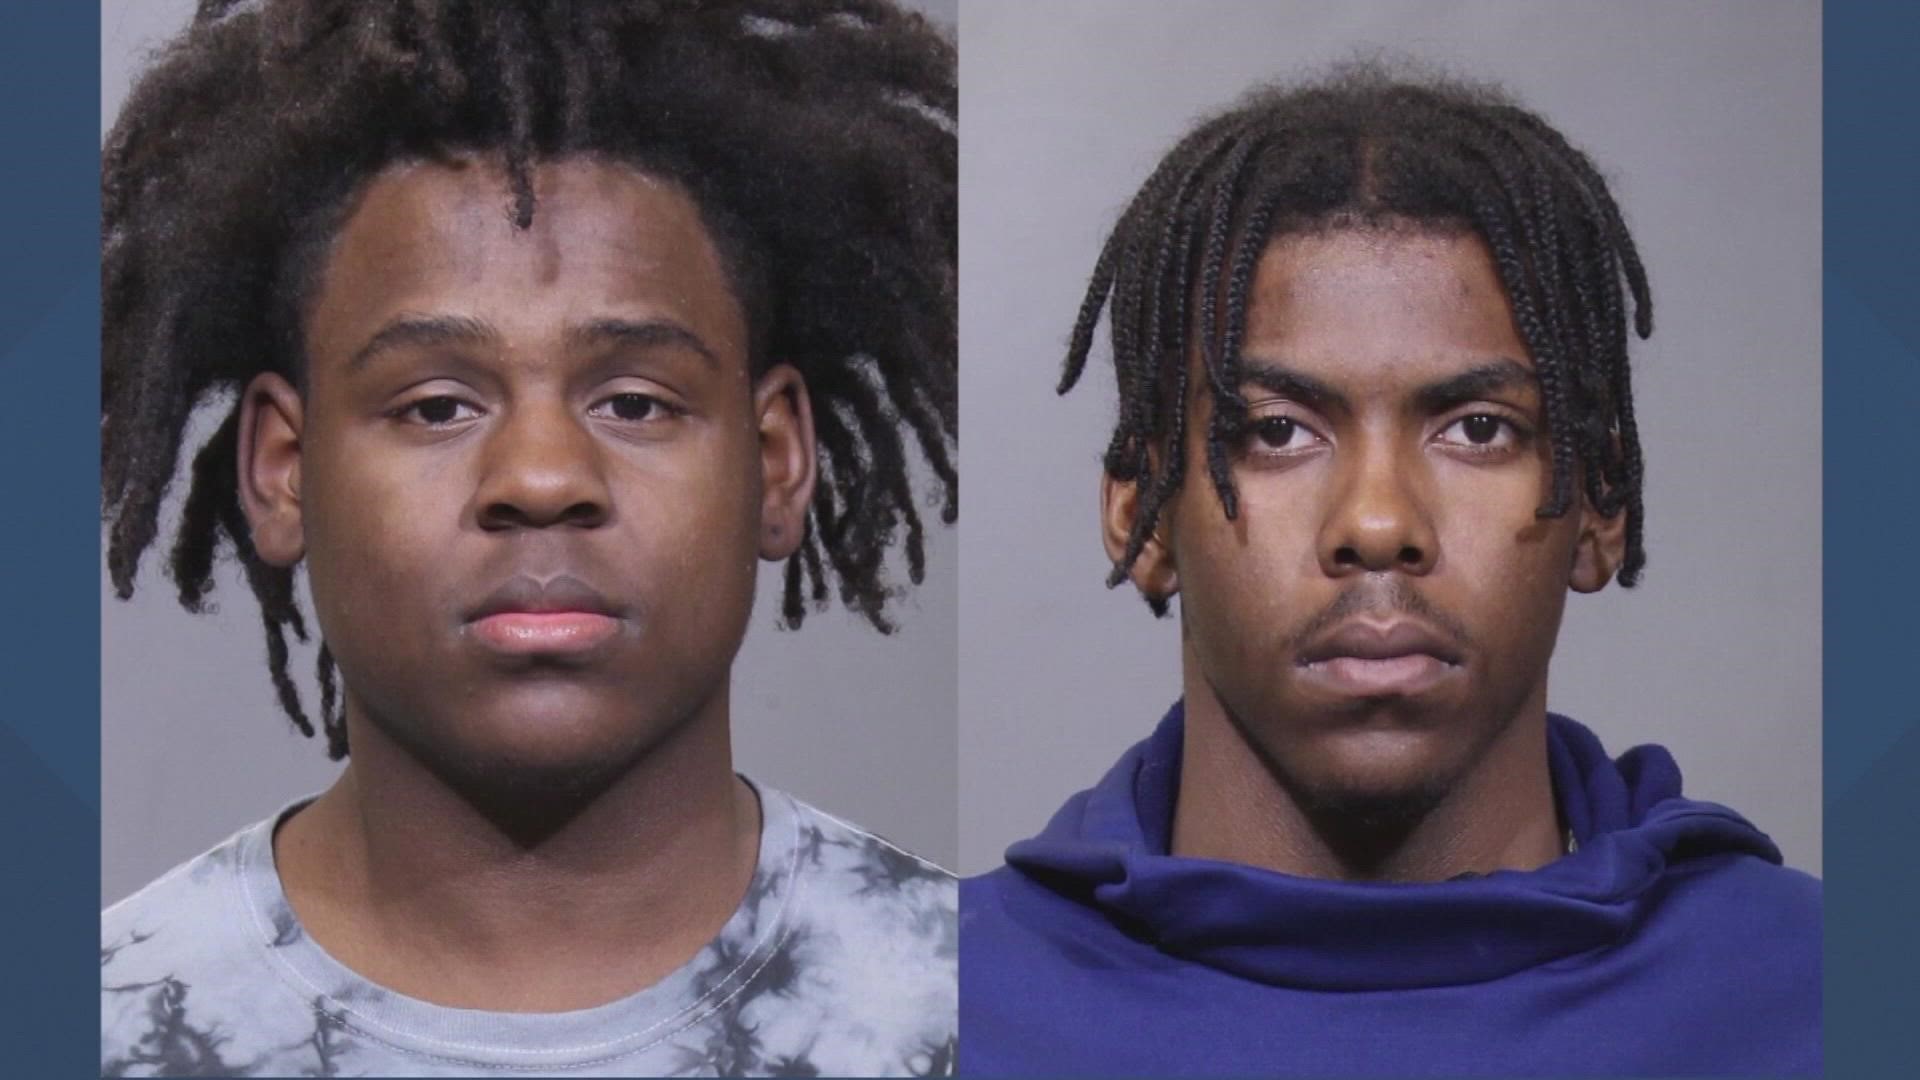 Terrell Hicks-Freeman, 15, and Baron Anderson, 16, are charged with murder in the June 3 deaths of 15-year-old Mahky Andrews and 18-year-old Layton Ridgedell.